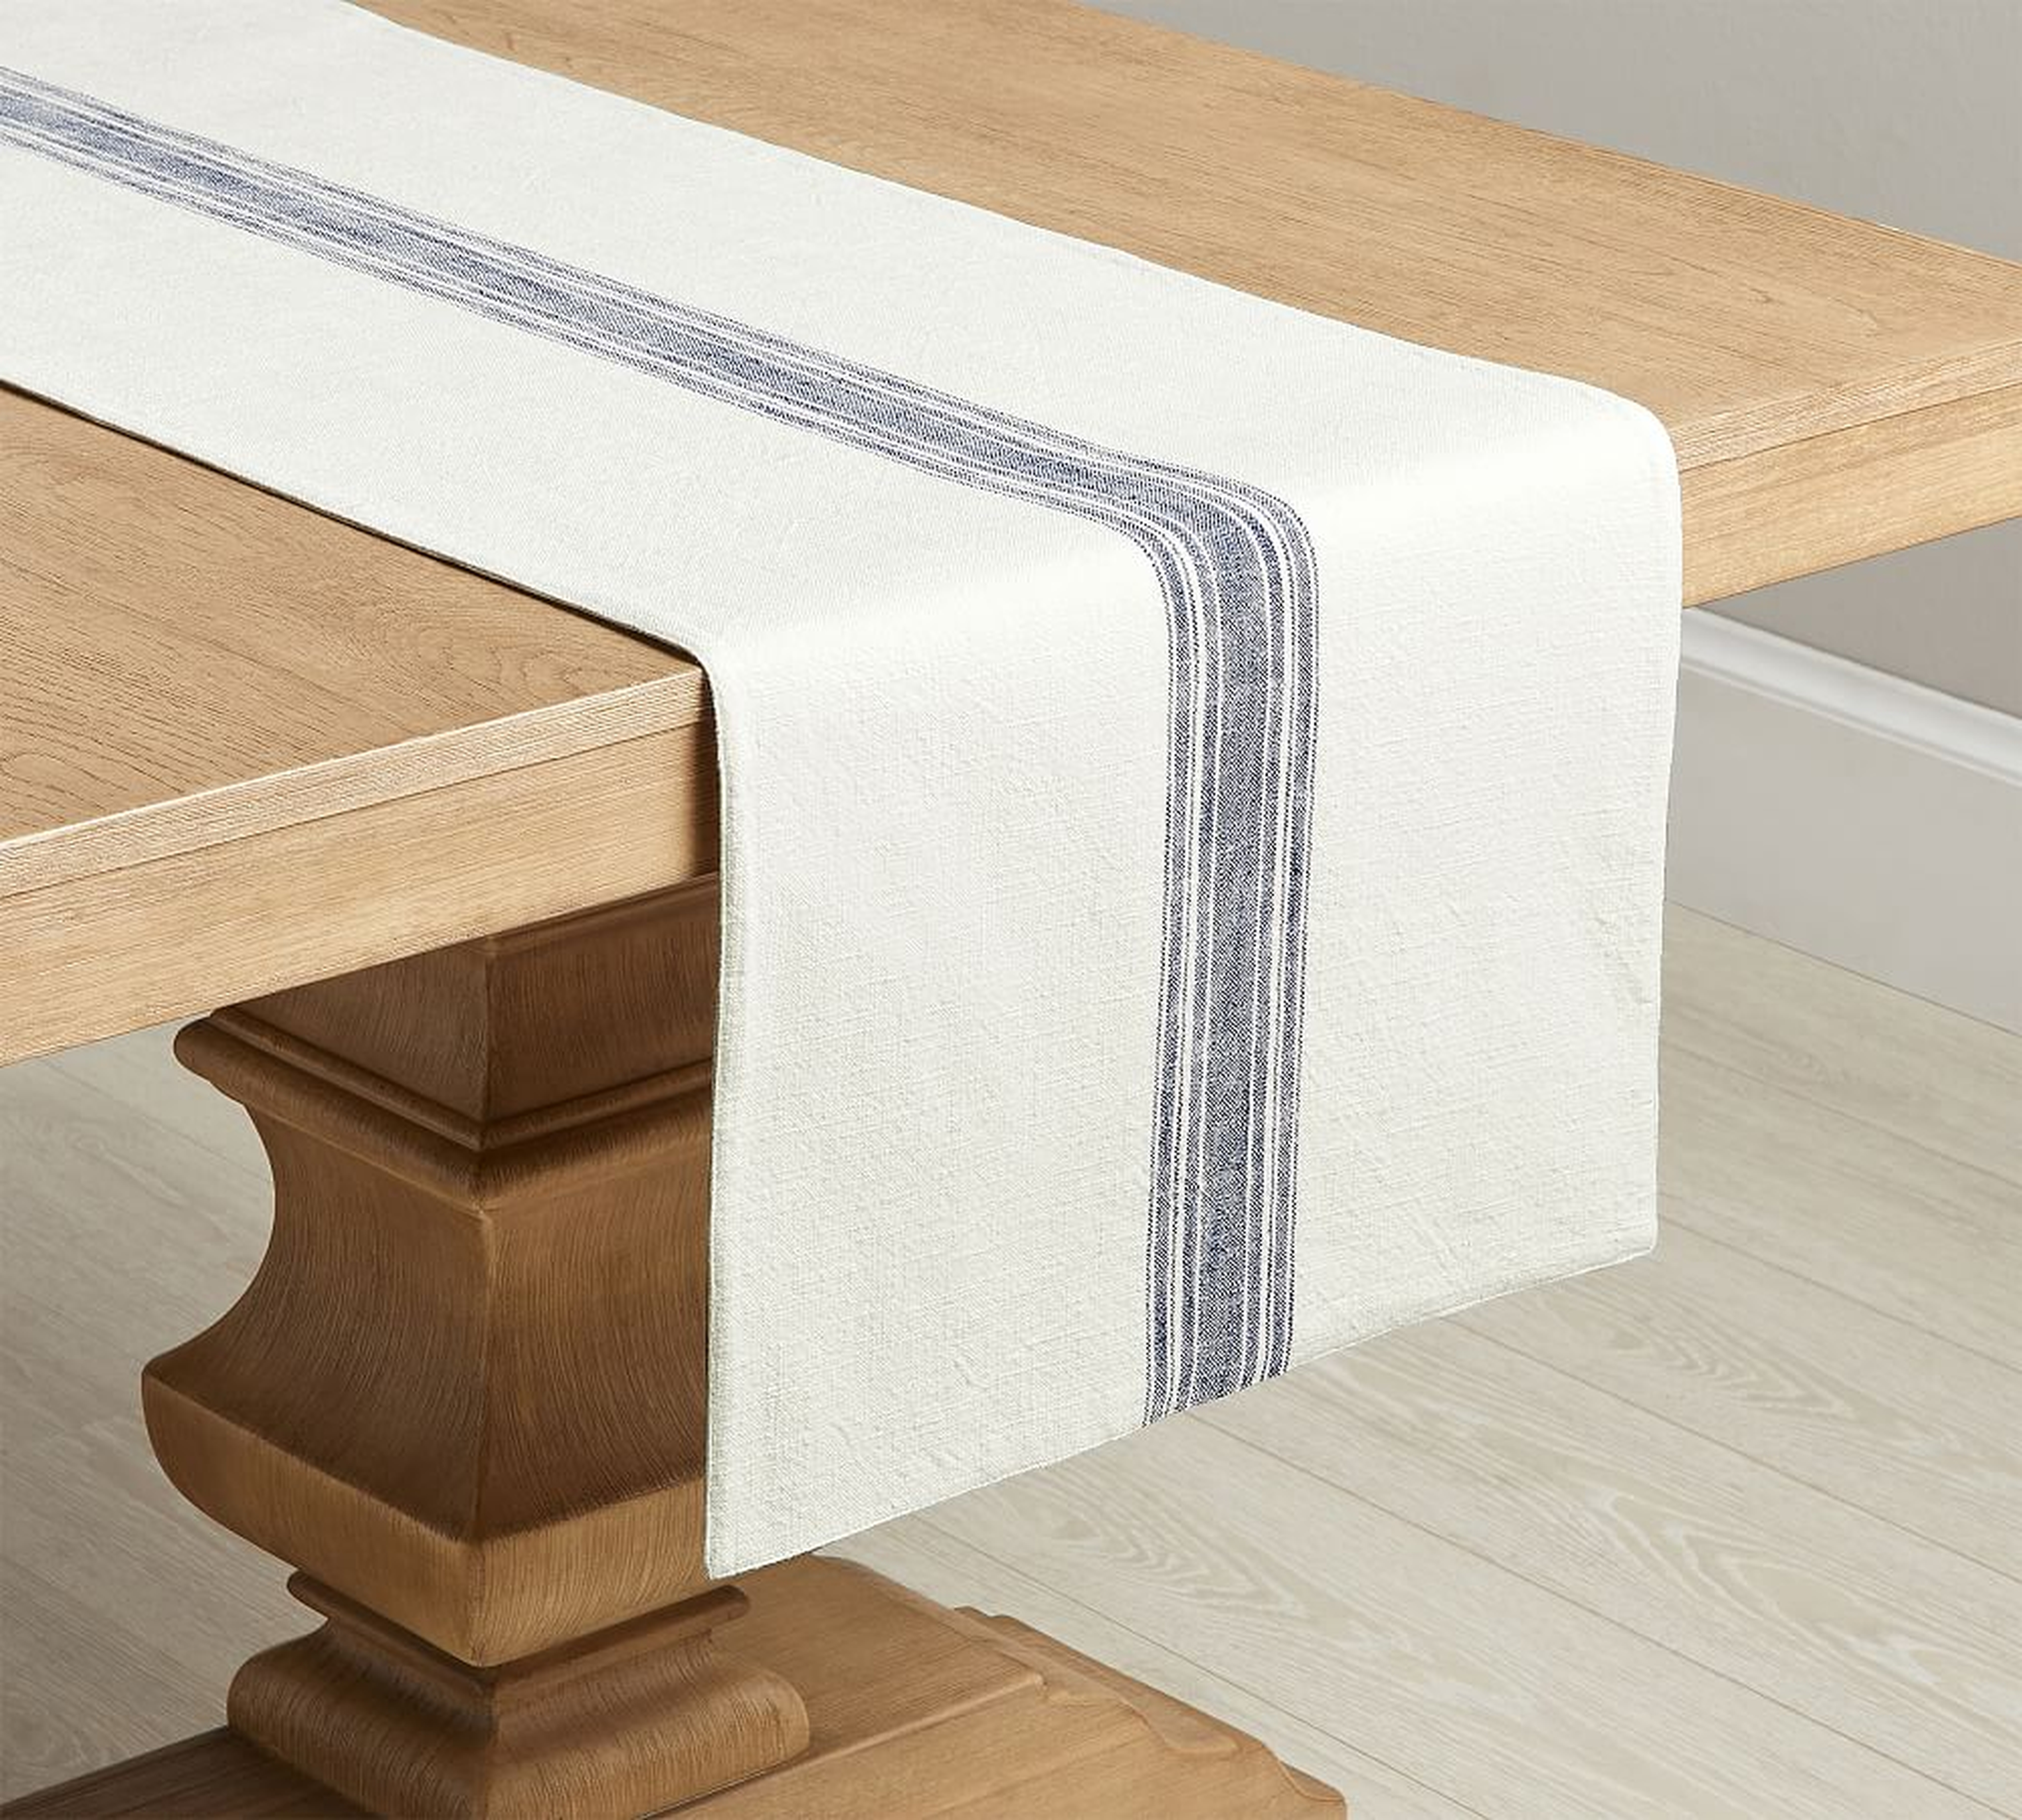 French Striped Organic Cotton Grain Sack Table Runner - Blue/Flax - Pottery Barn